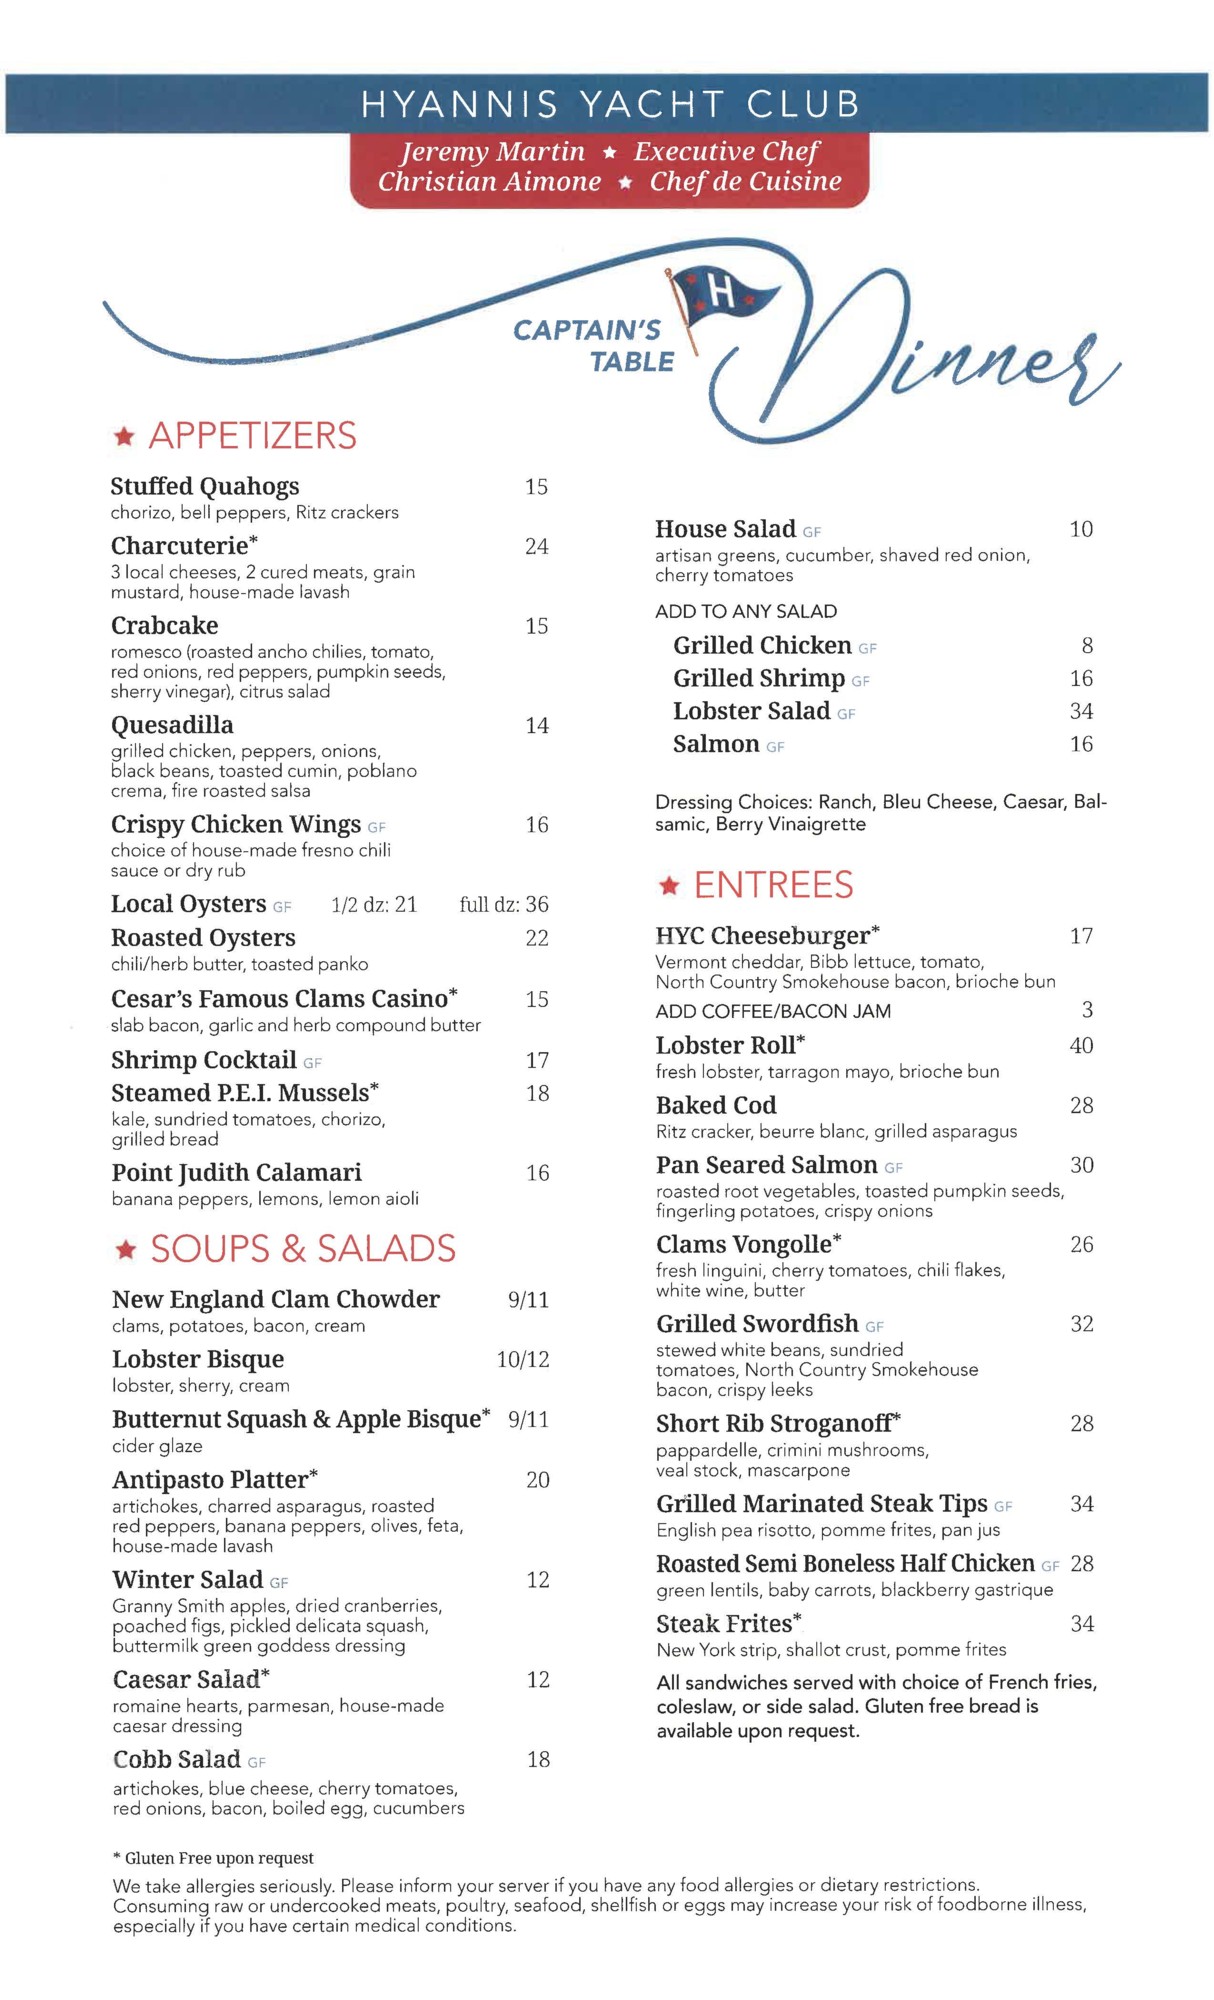 hyannis yacht club menu with prices